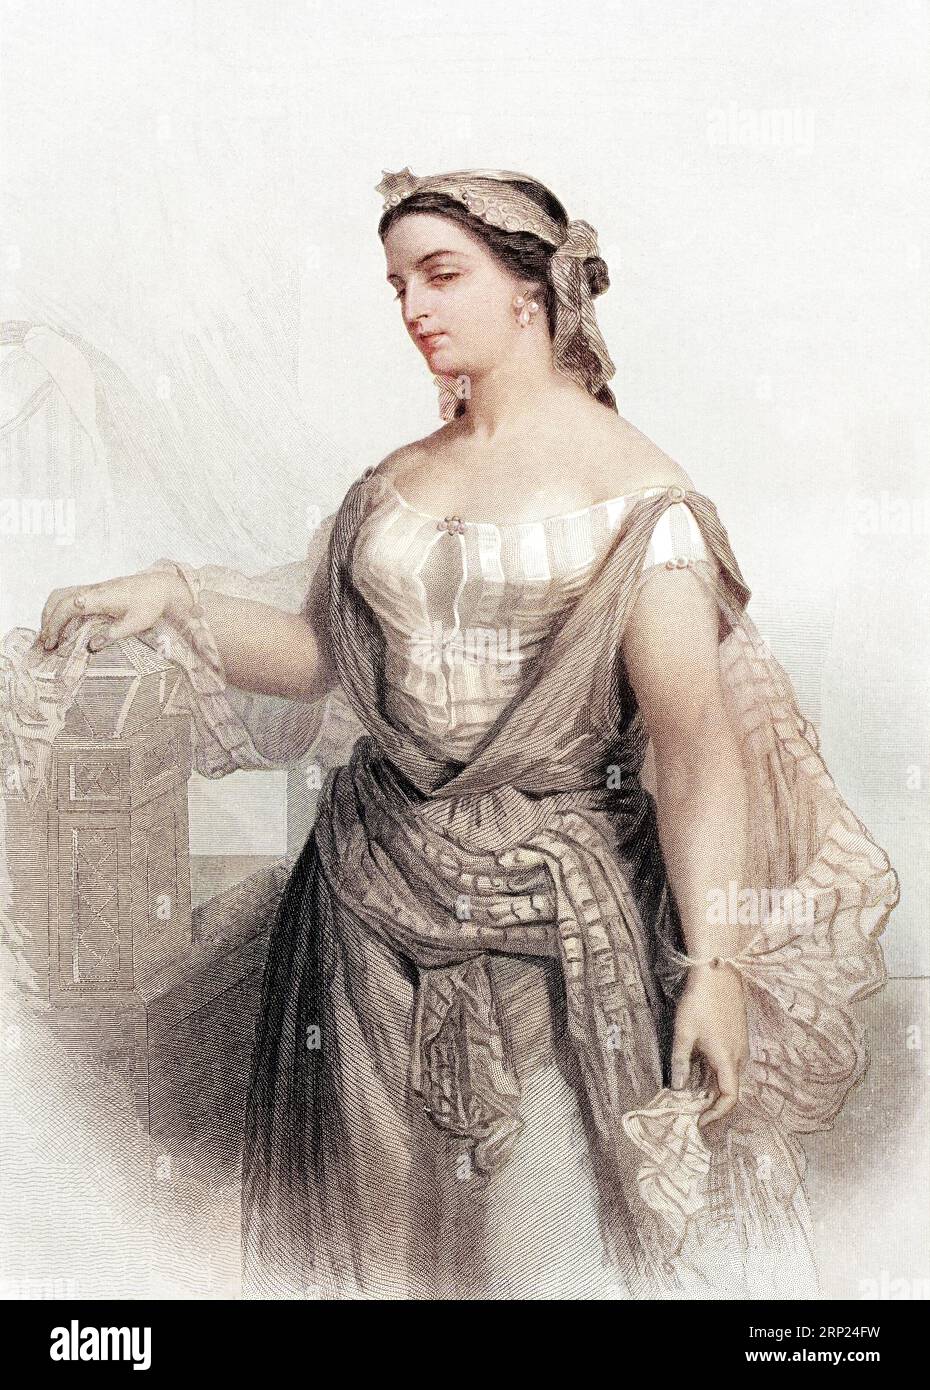 Esther (born Hadassah) was a woman in the Hebrew Bible, the queen of Ahasuerus and the heroine of the Biblical Book of Esther. Old 19th century engraved colored illustration from Mugeres de la Biblia by Joaquin Roca y Cornet 1862 Stock Photo